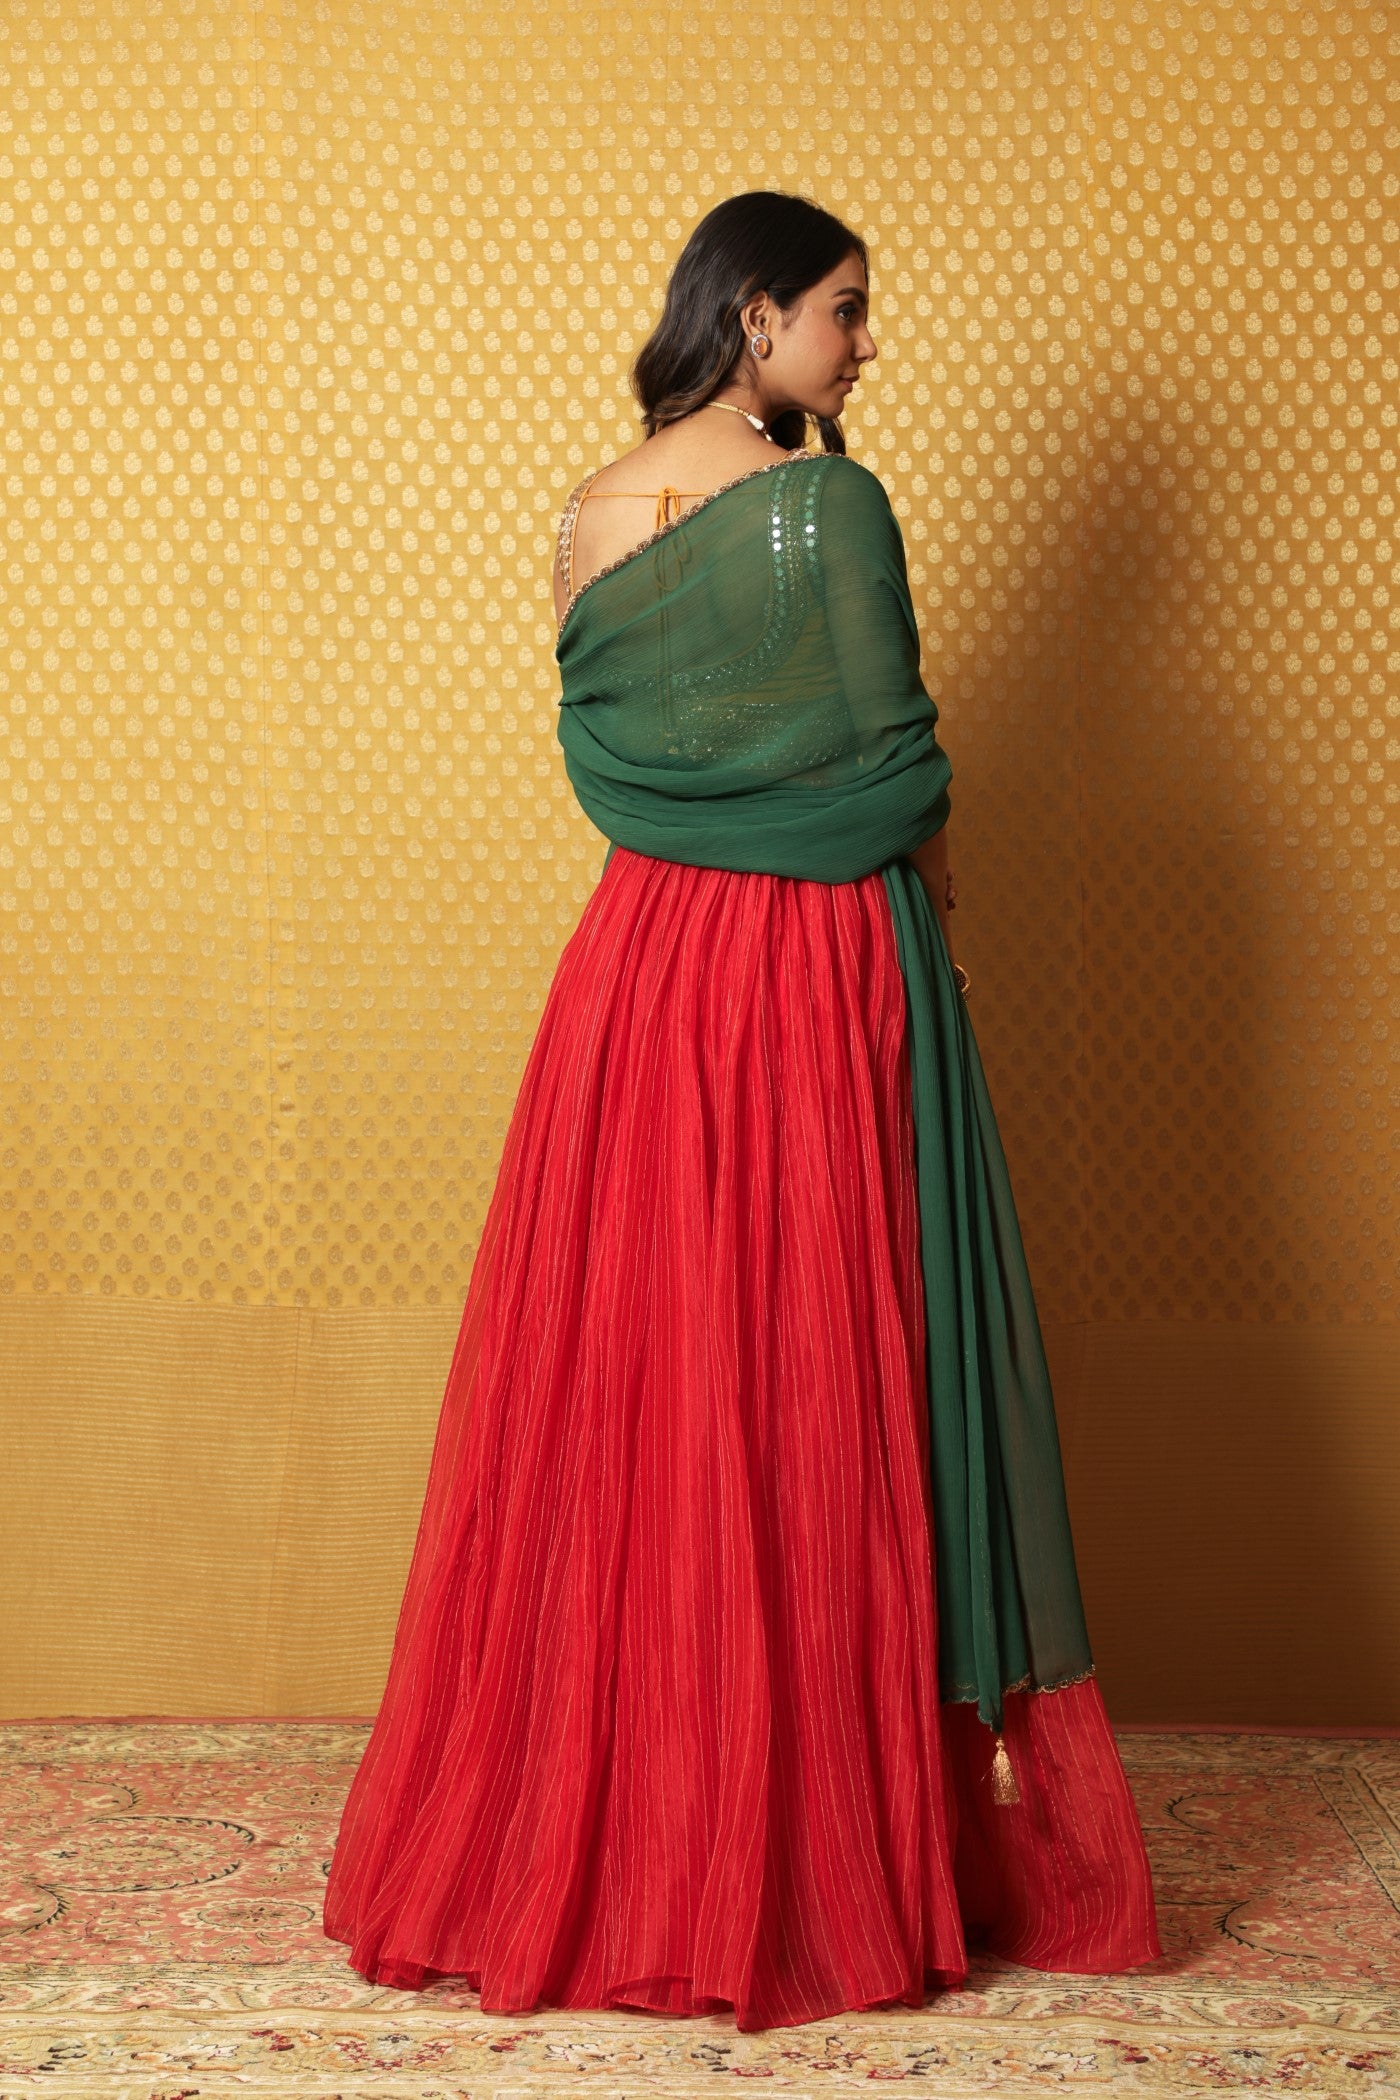 Hand-Embroidered Tomato-Red Striped Pure Silk-Organza Lehenga Paired With Pure Crepe-Silk Blouse & Chiffon Dupatta (Tomato-Red, Mustard & Green)